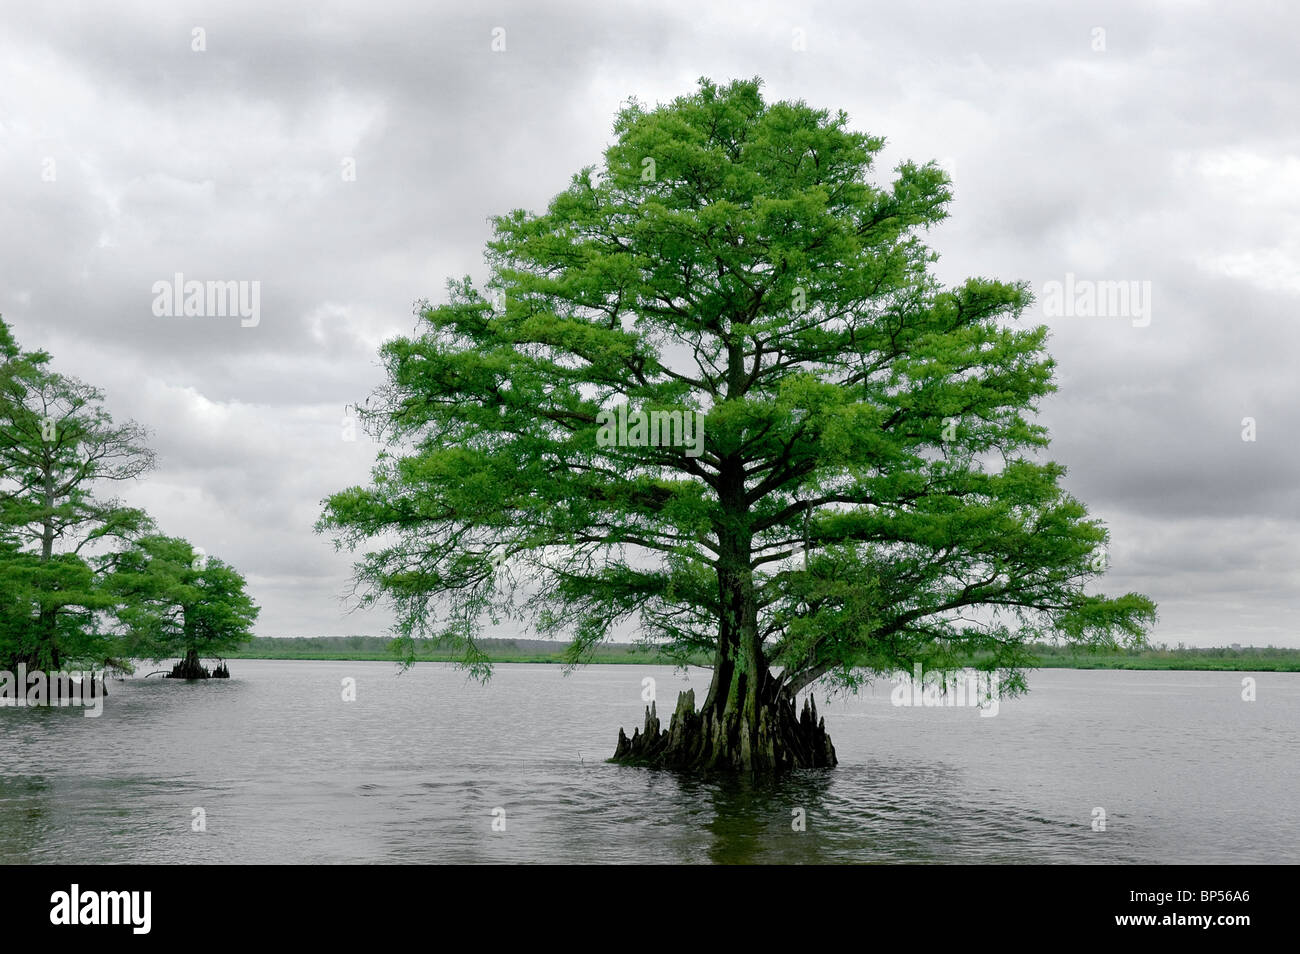 bald cypress trees in the Mobile Delta area surrounding Mobile Bay along the Gulf coastal area of Mobile Alabama Stock Photo